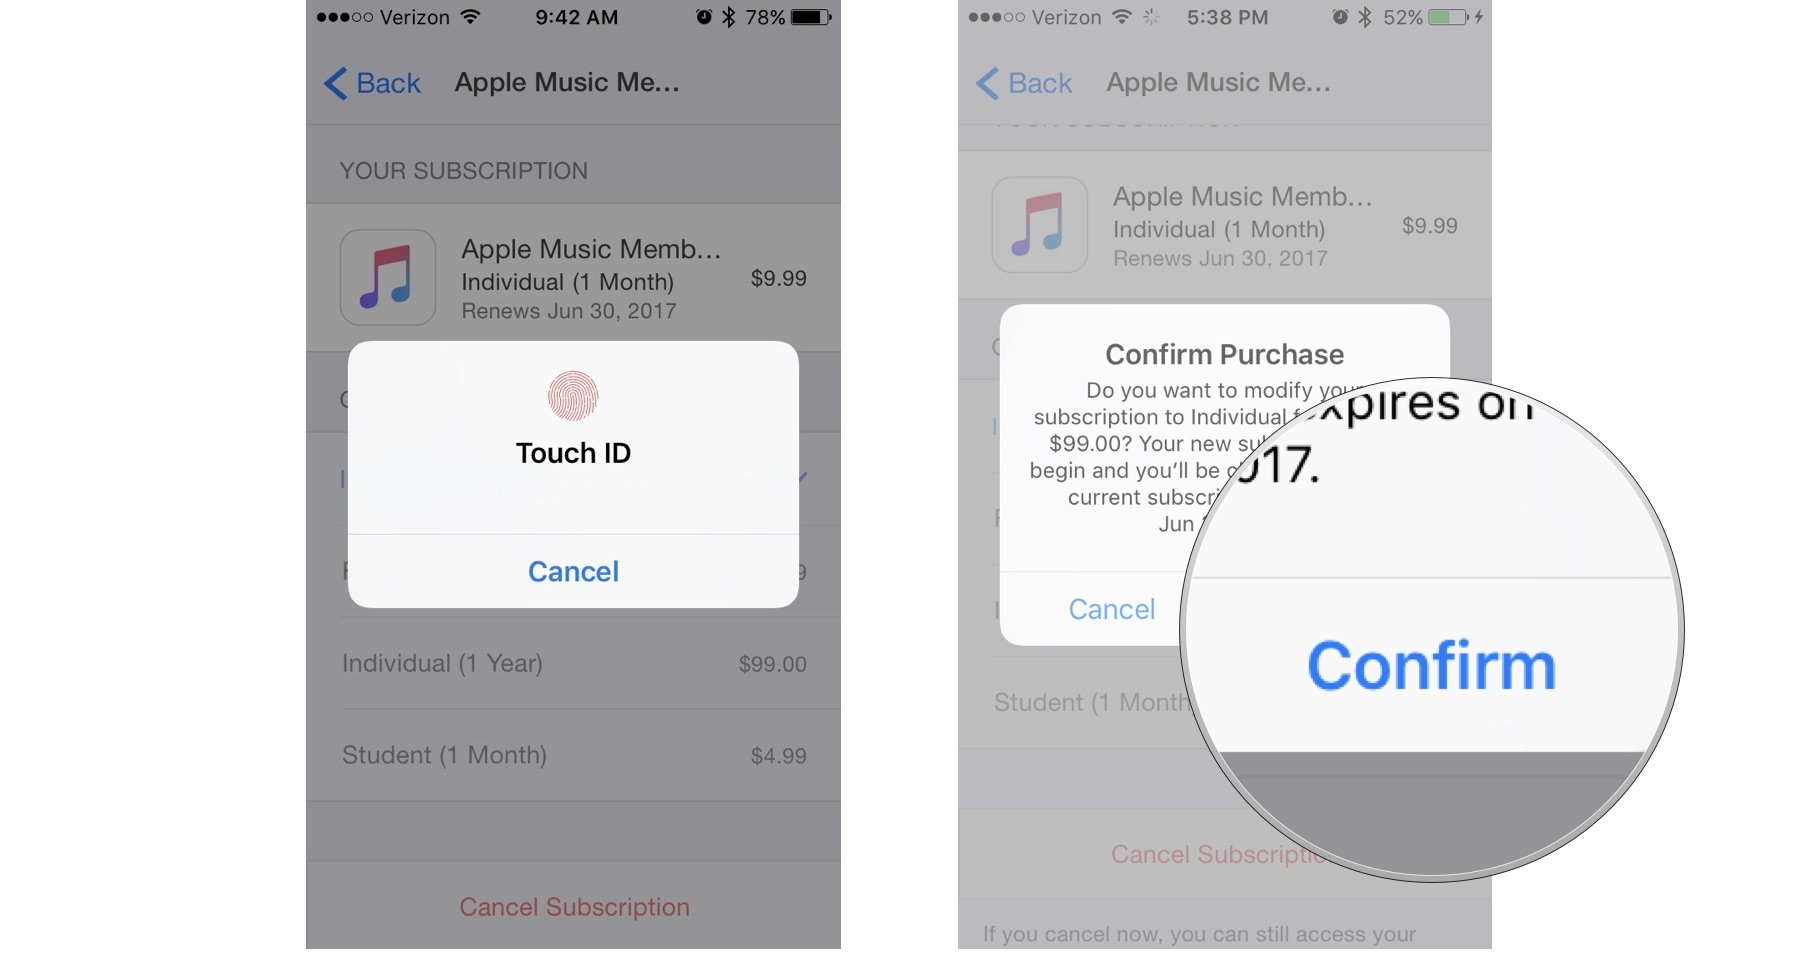 Enter your Apple ID or Touch ID, then tap Confirm